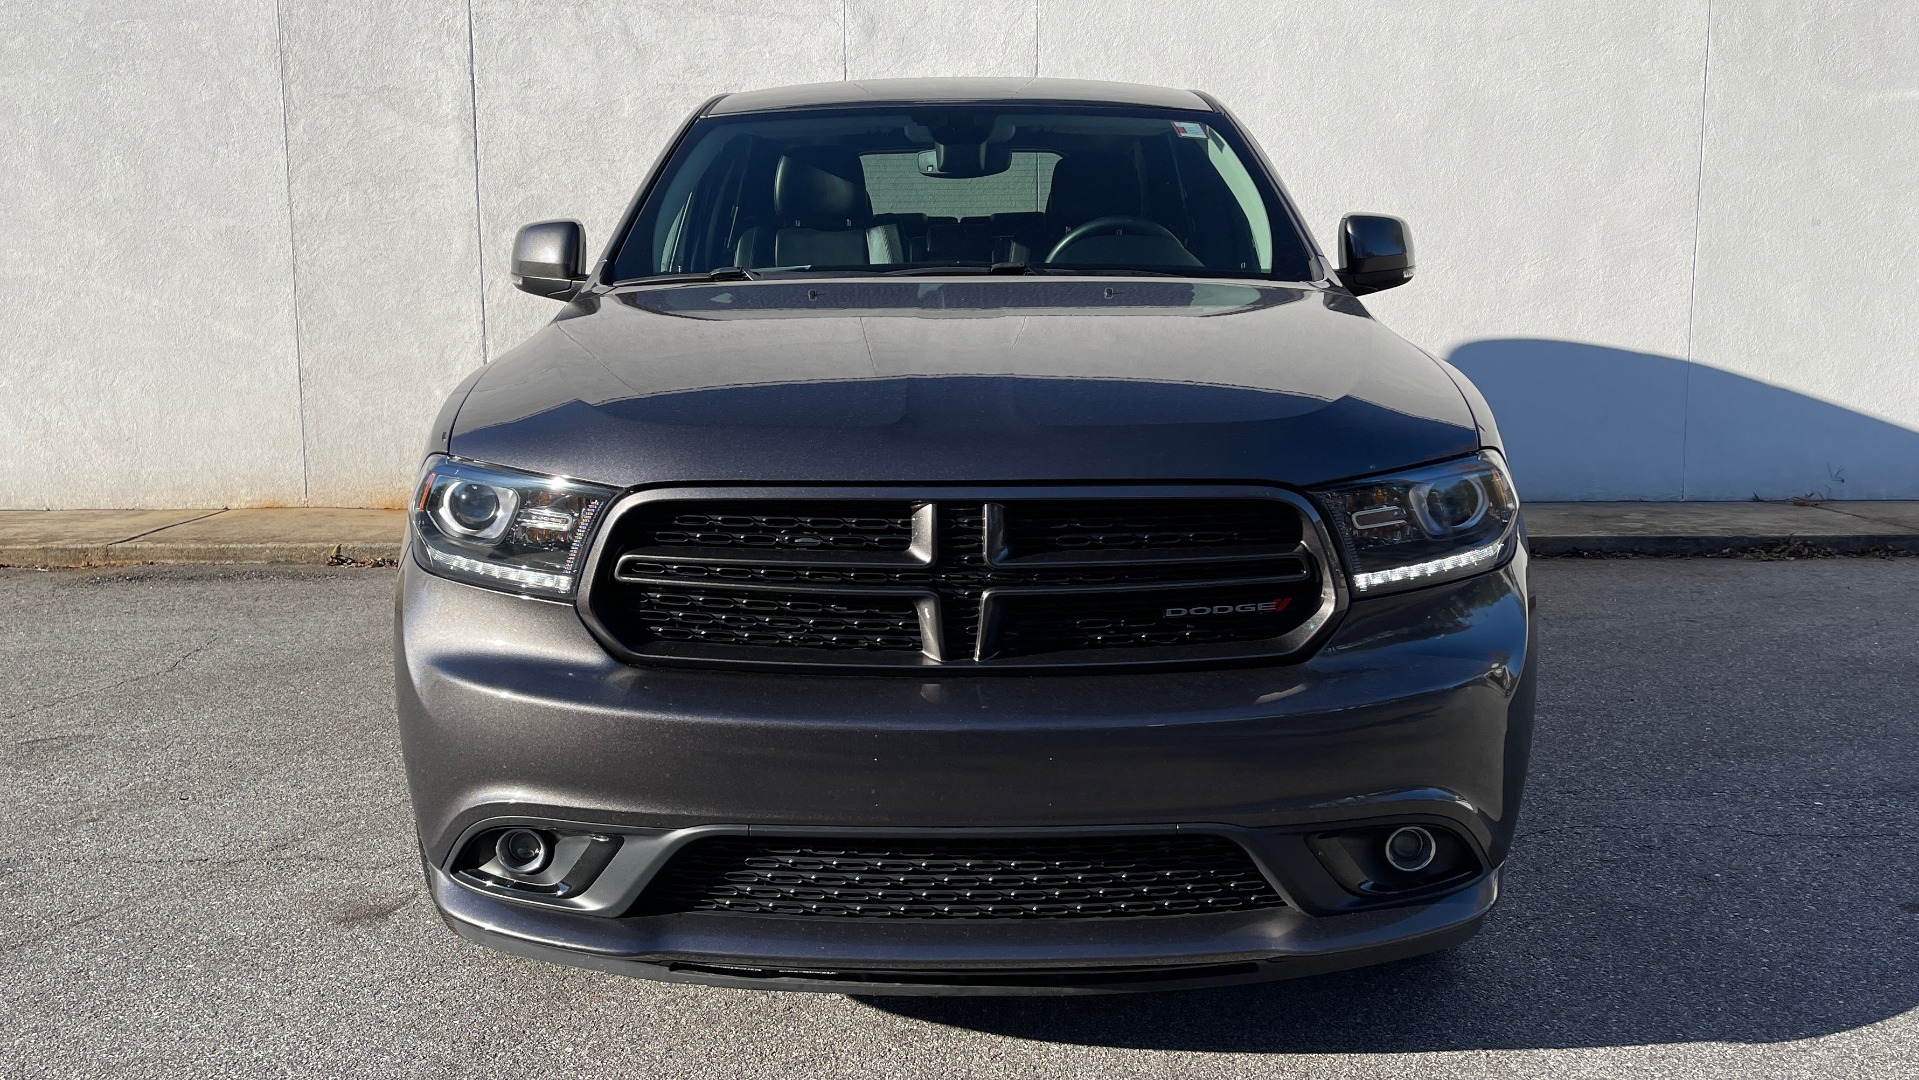 Used 2018 Dodge DURANGO GT RWD / 3.6L V6 / 8-SPD AUTO / APPLE CARPLAY / REARVIEW for sale $32,295 at Formula Imports in Charlotte NC 28227 8